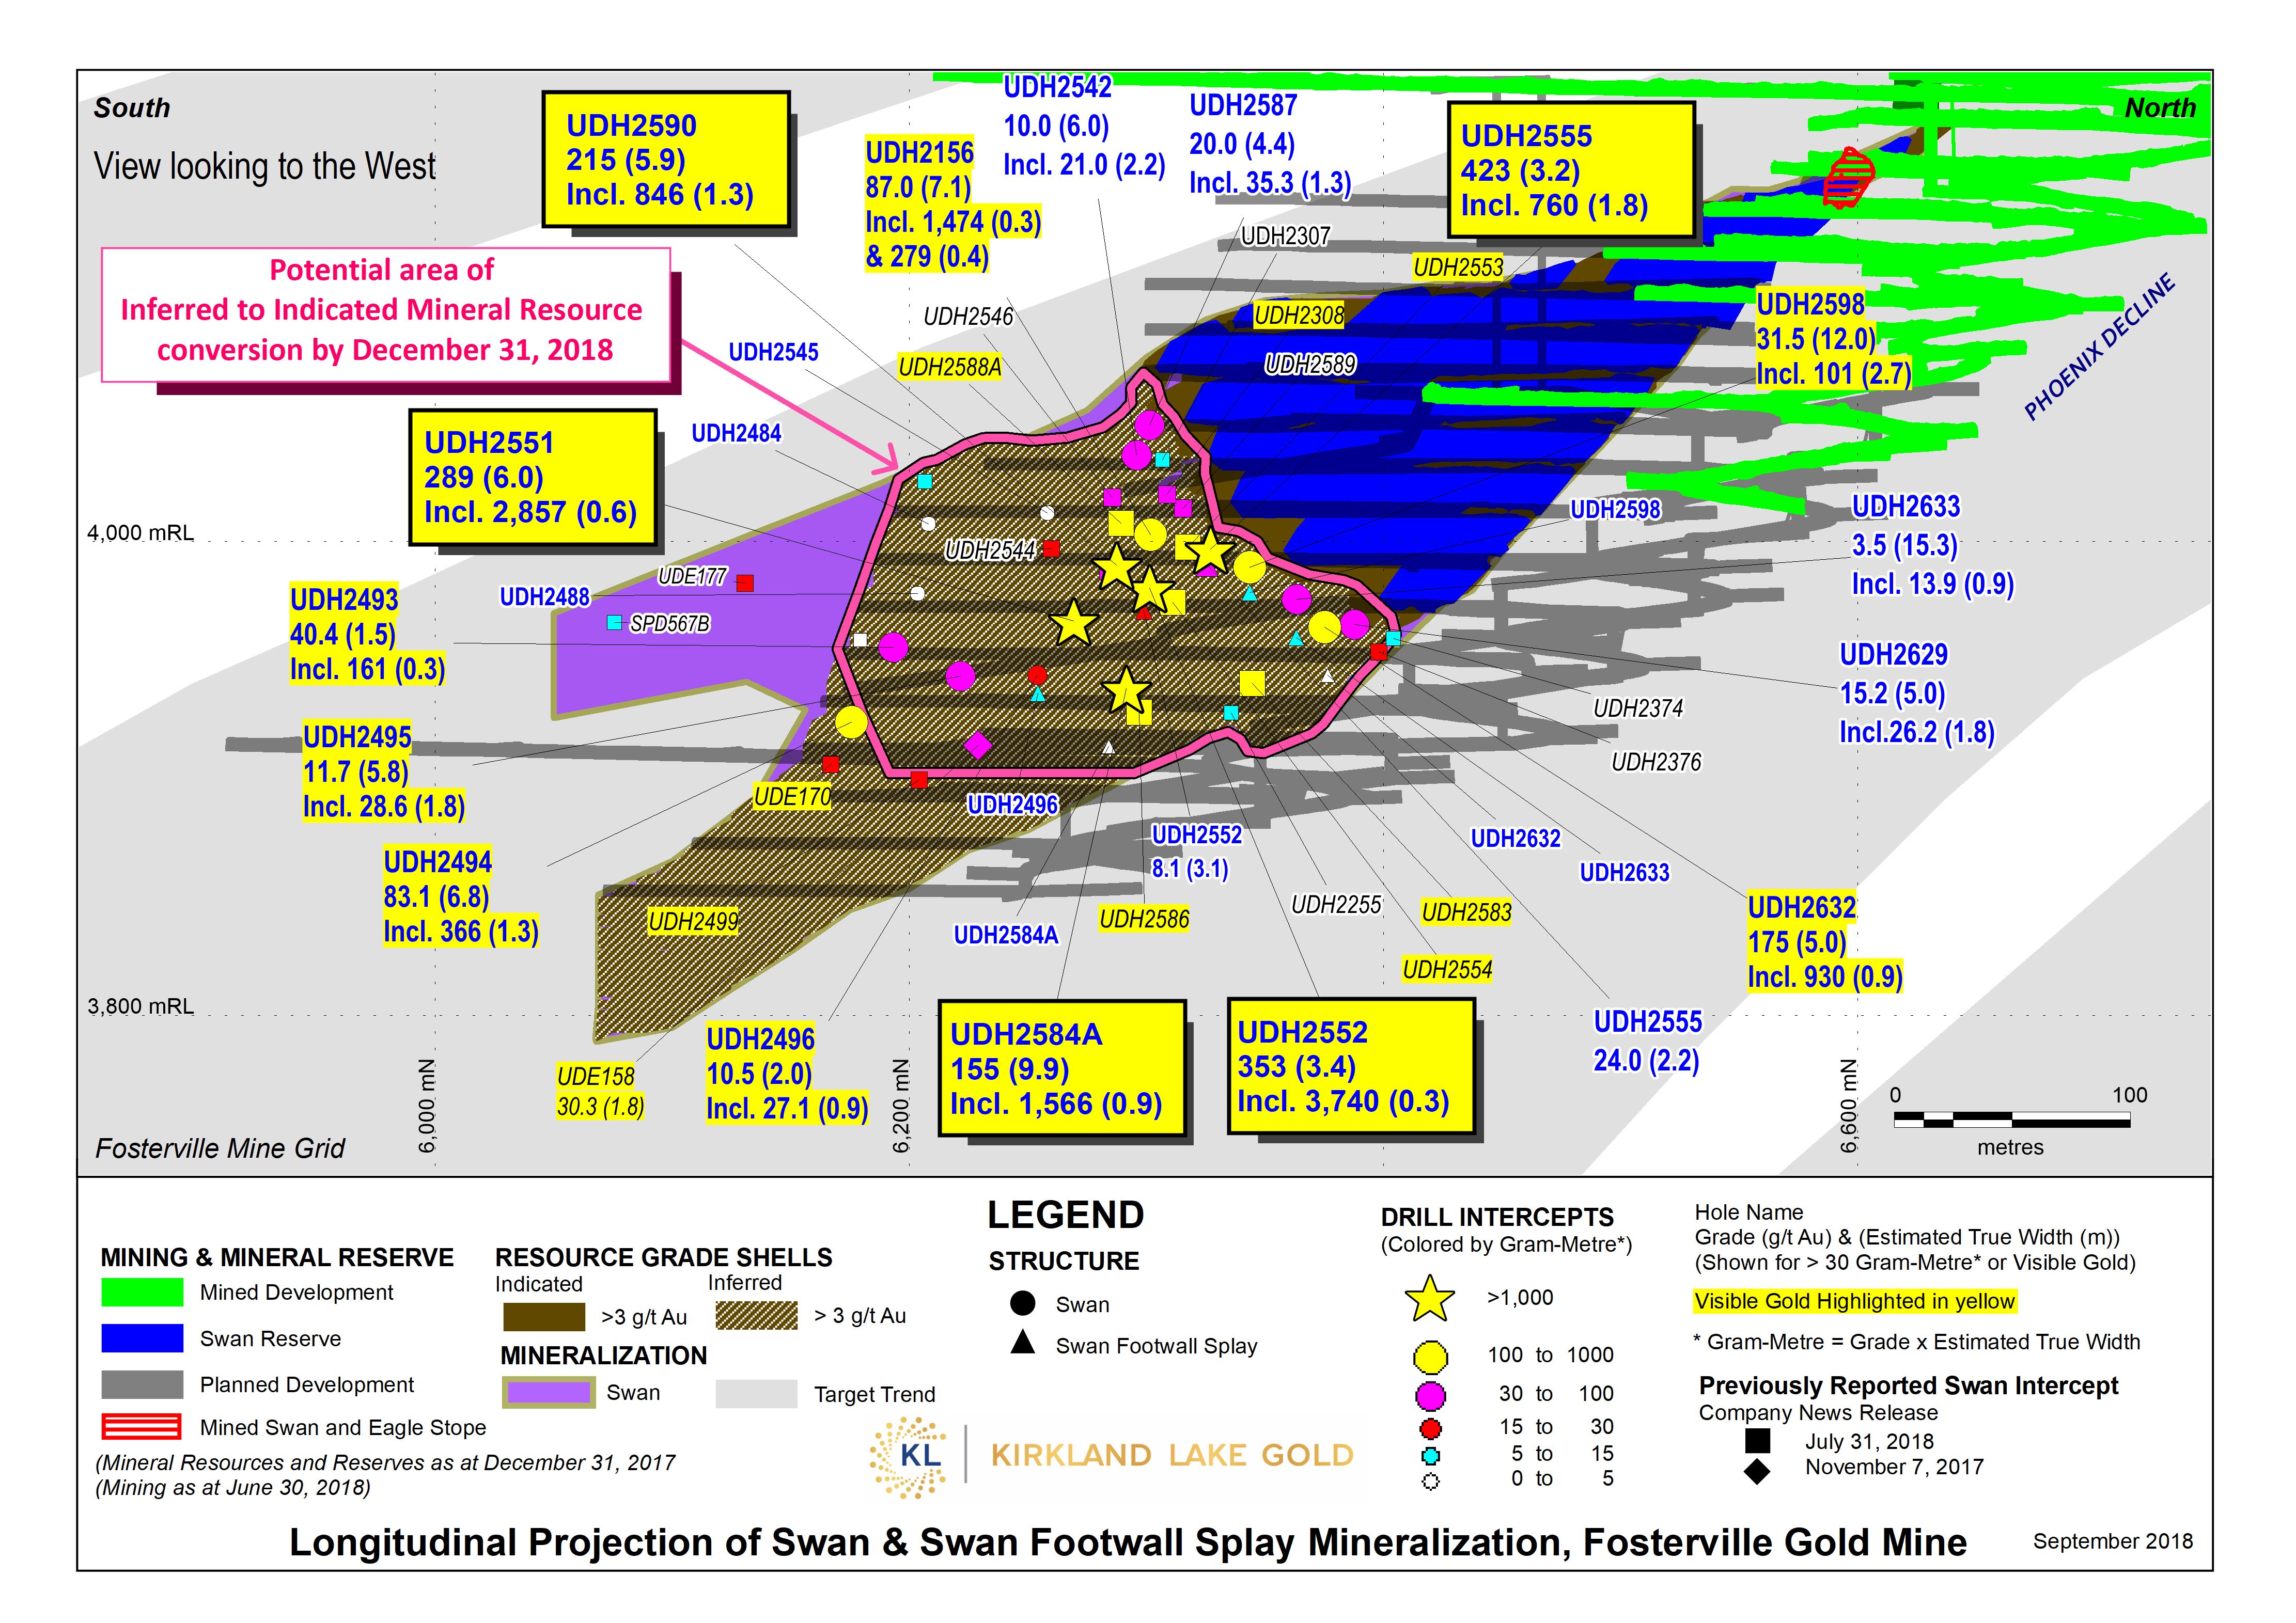 Figure 2. 	Longitudinal Projection of Swan and Swan Footwall Mineralization, Fosterville Gold Mine